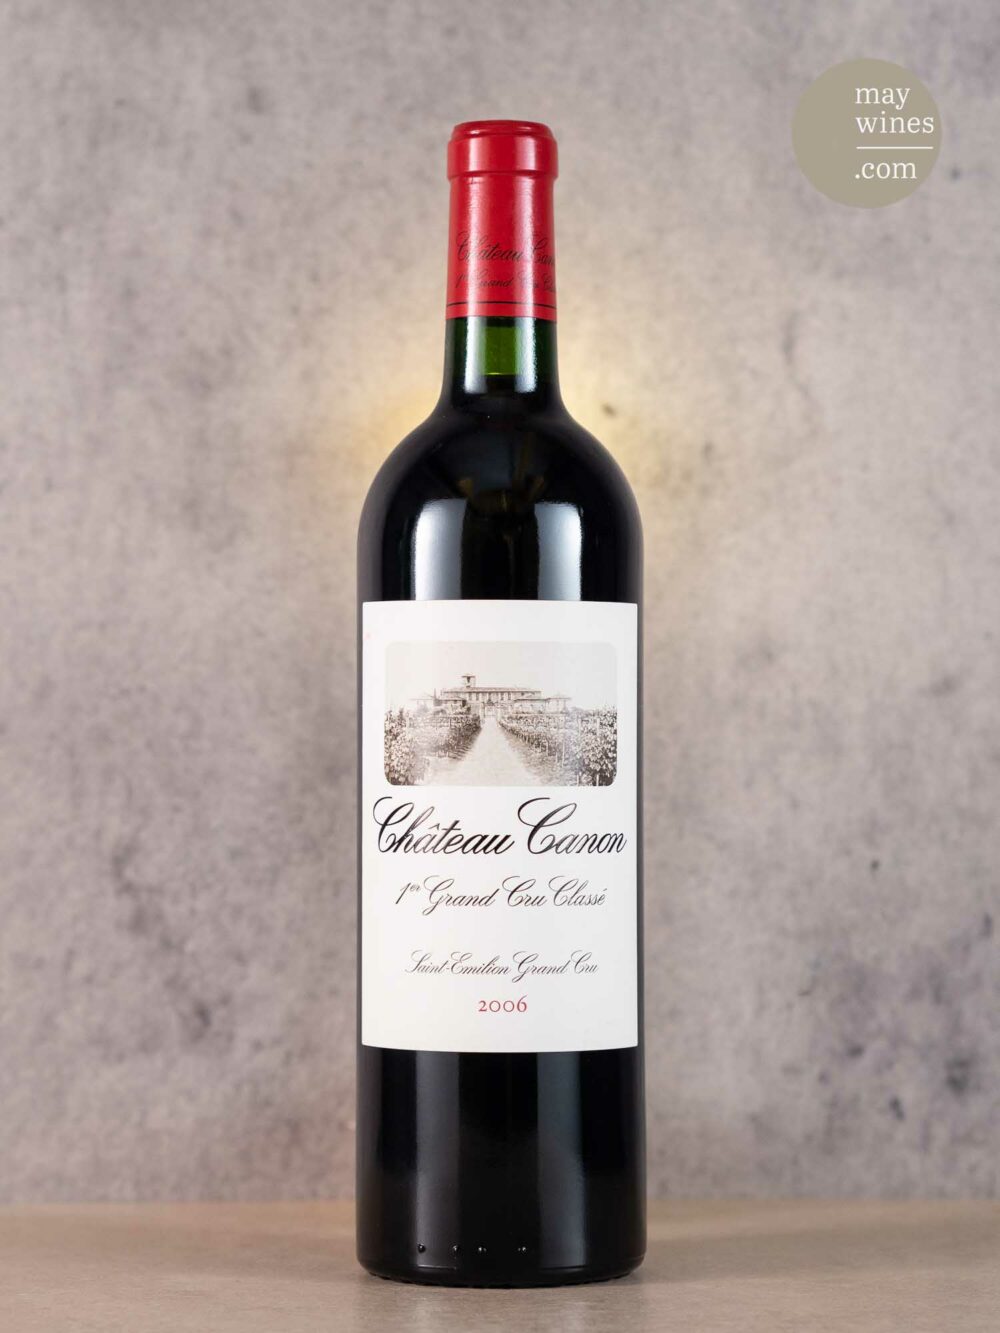 May Wines – Rotwein – 2006 Château Canon